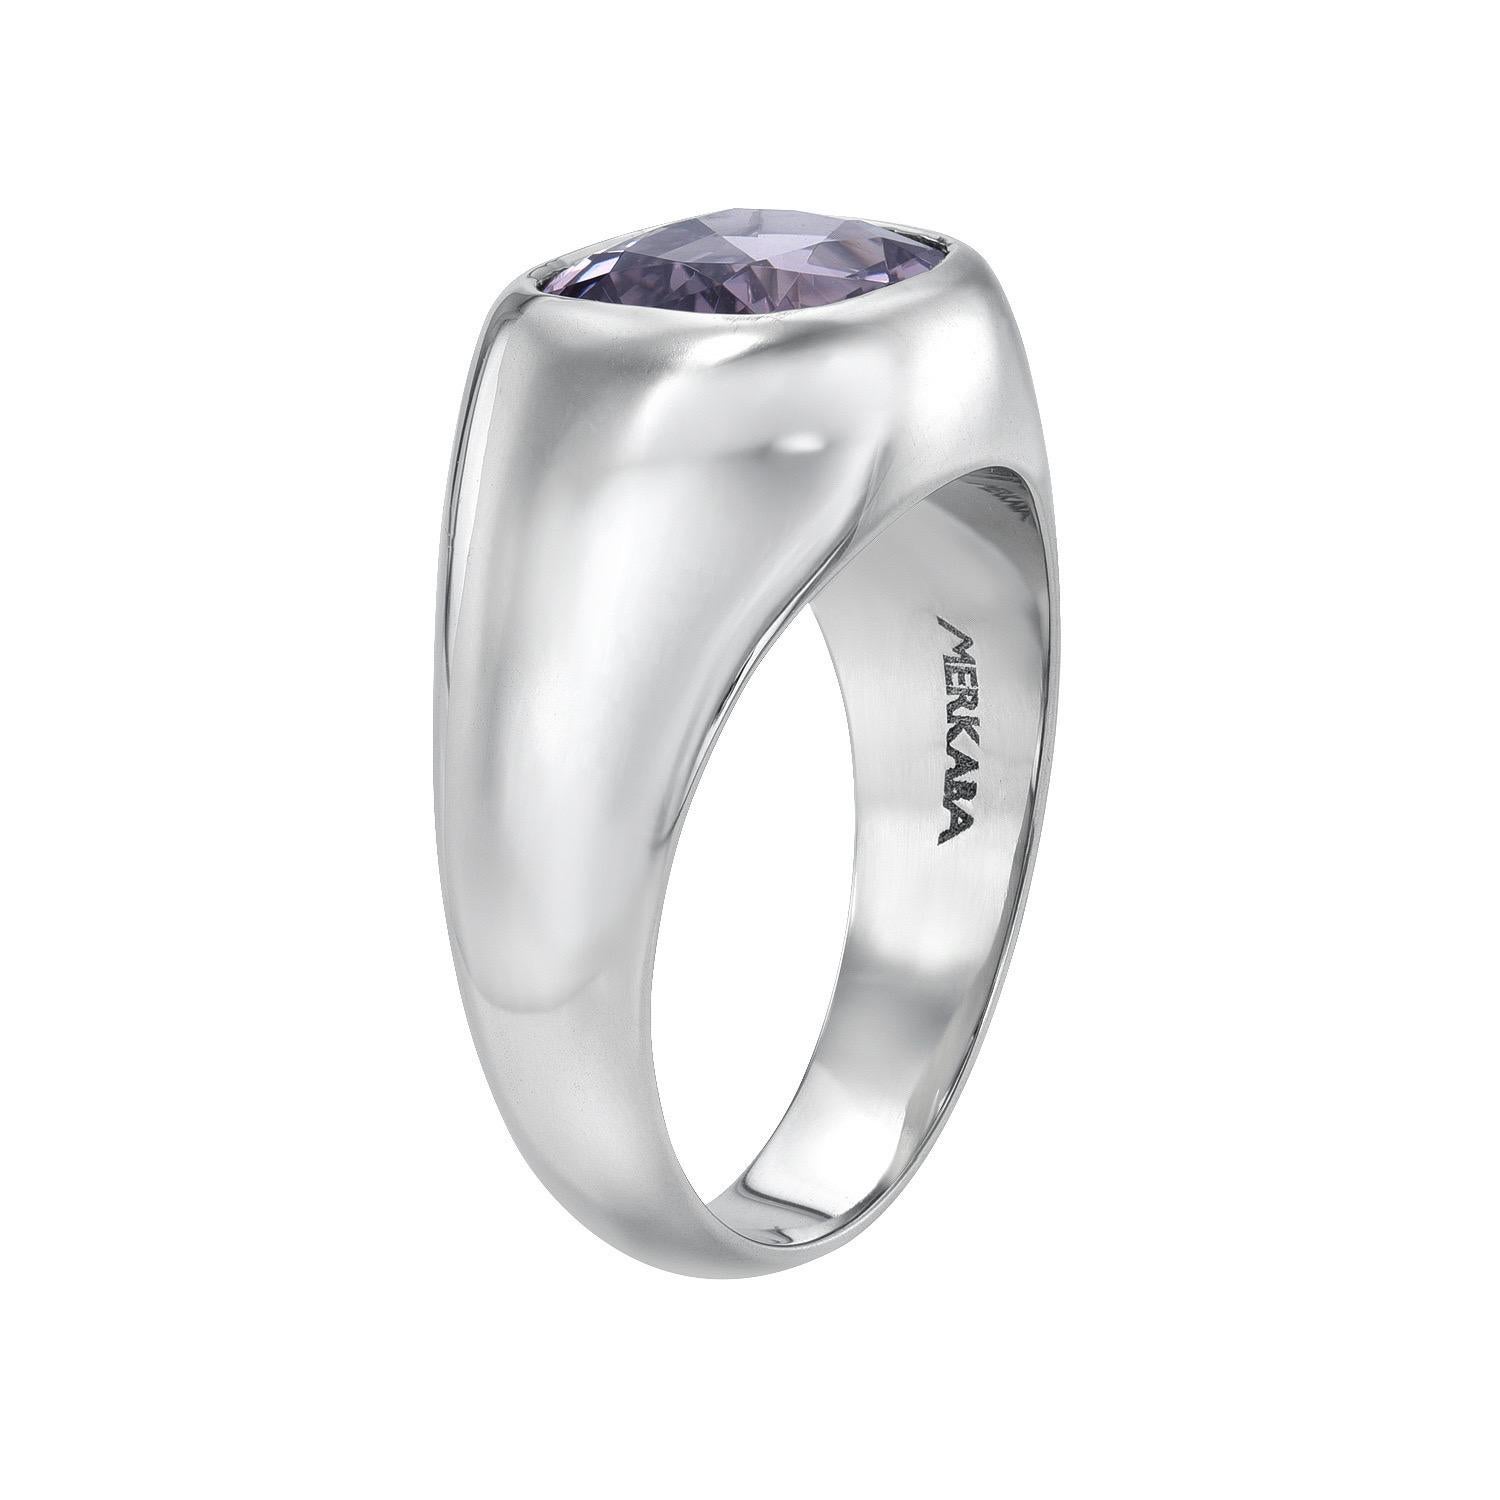 Magnificent unisex platinum ring set with a pristine 3.30 carat Grey-Violet Spinel cushion.
Ring size 8.25. Resizing is complementary upon request.
Crafted by extremely skilled hands in the USA.
Returns are accepted and paid by us within 7 days of